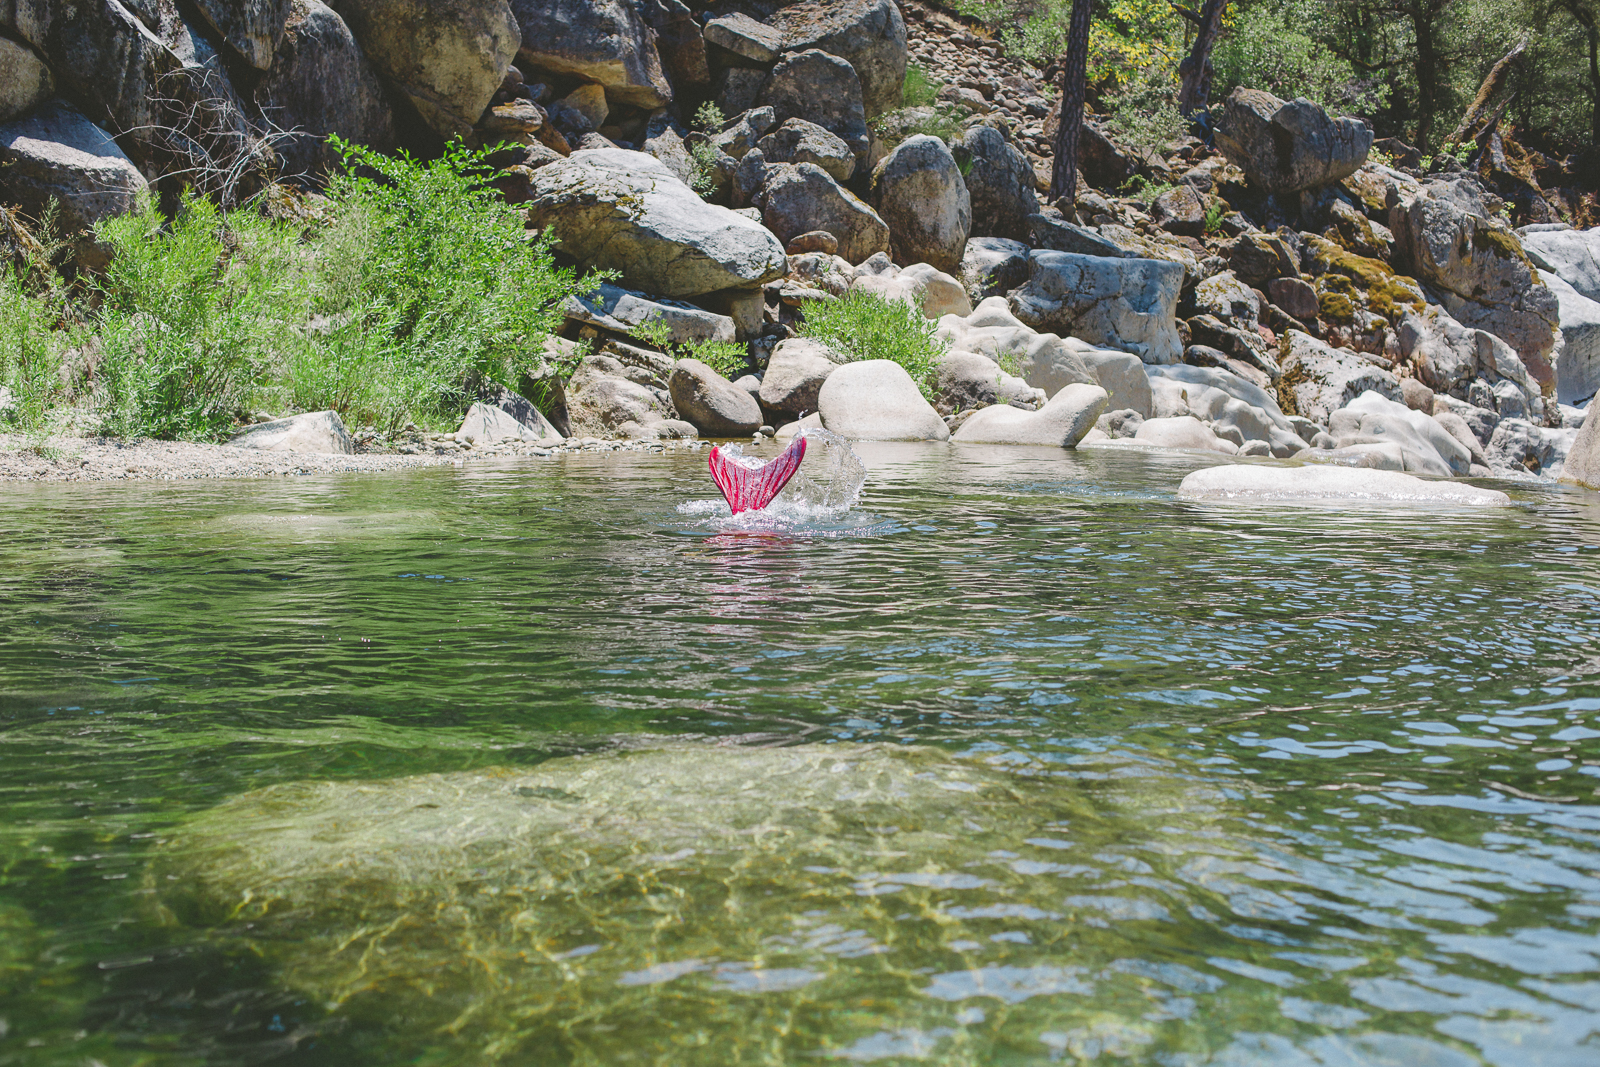 Mermaid flipping her tail in the Yuba River